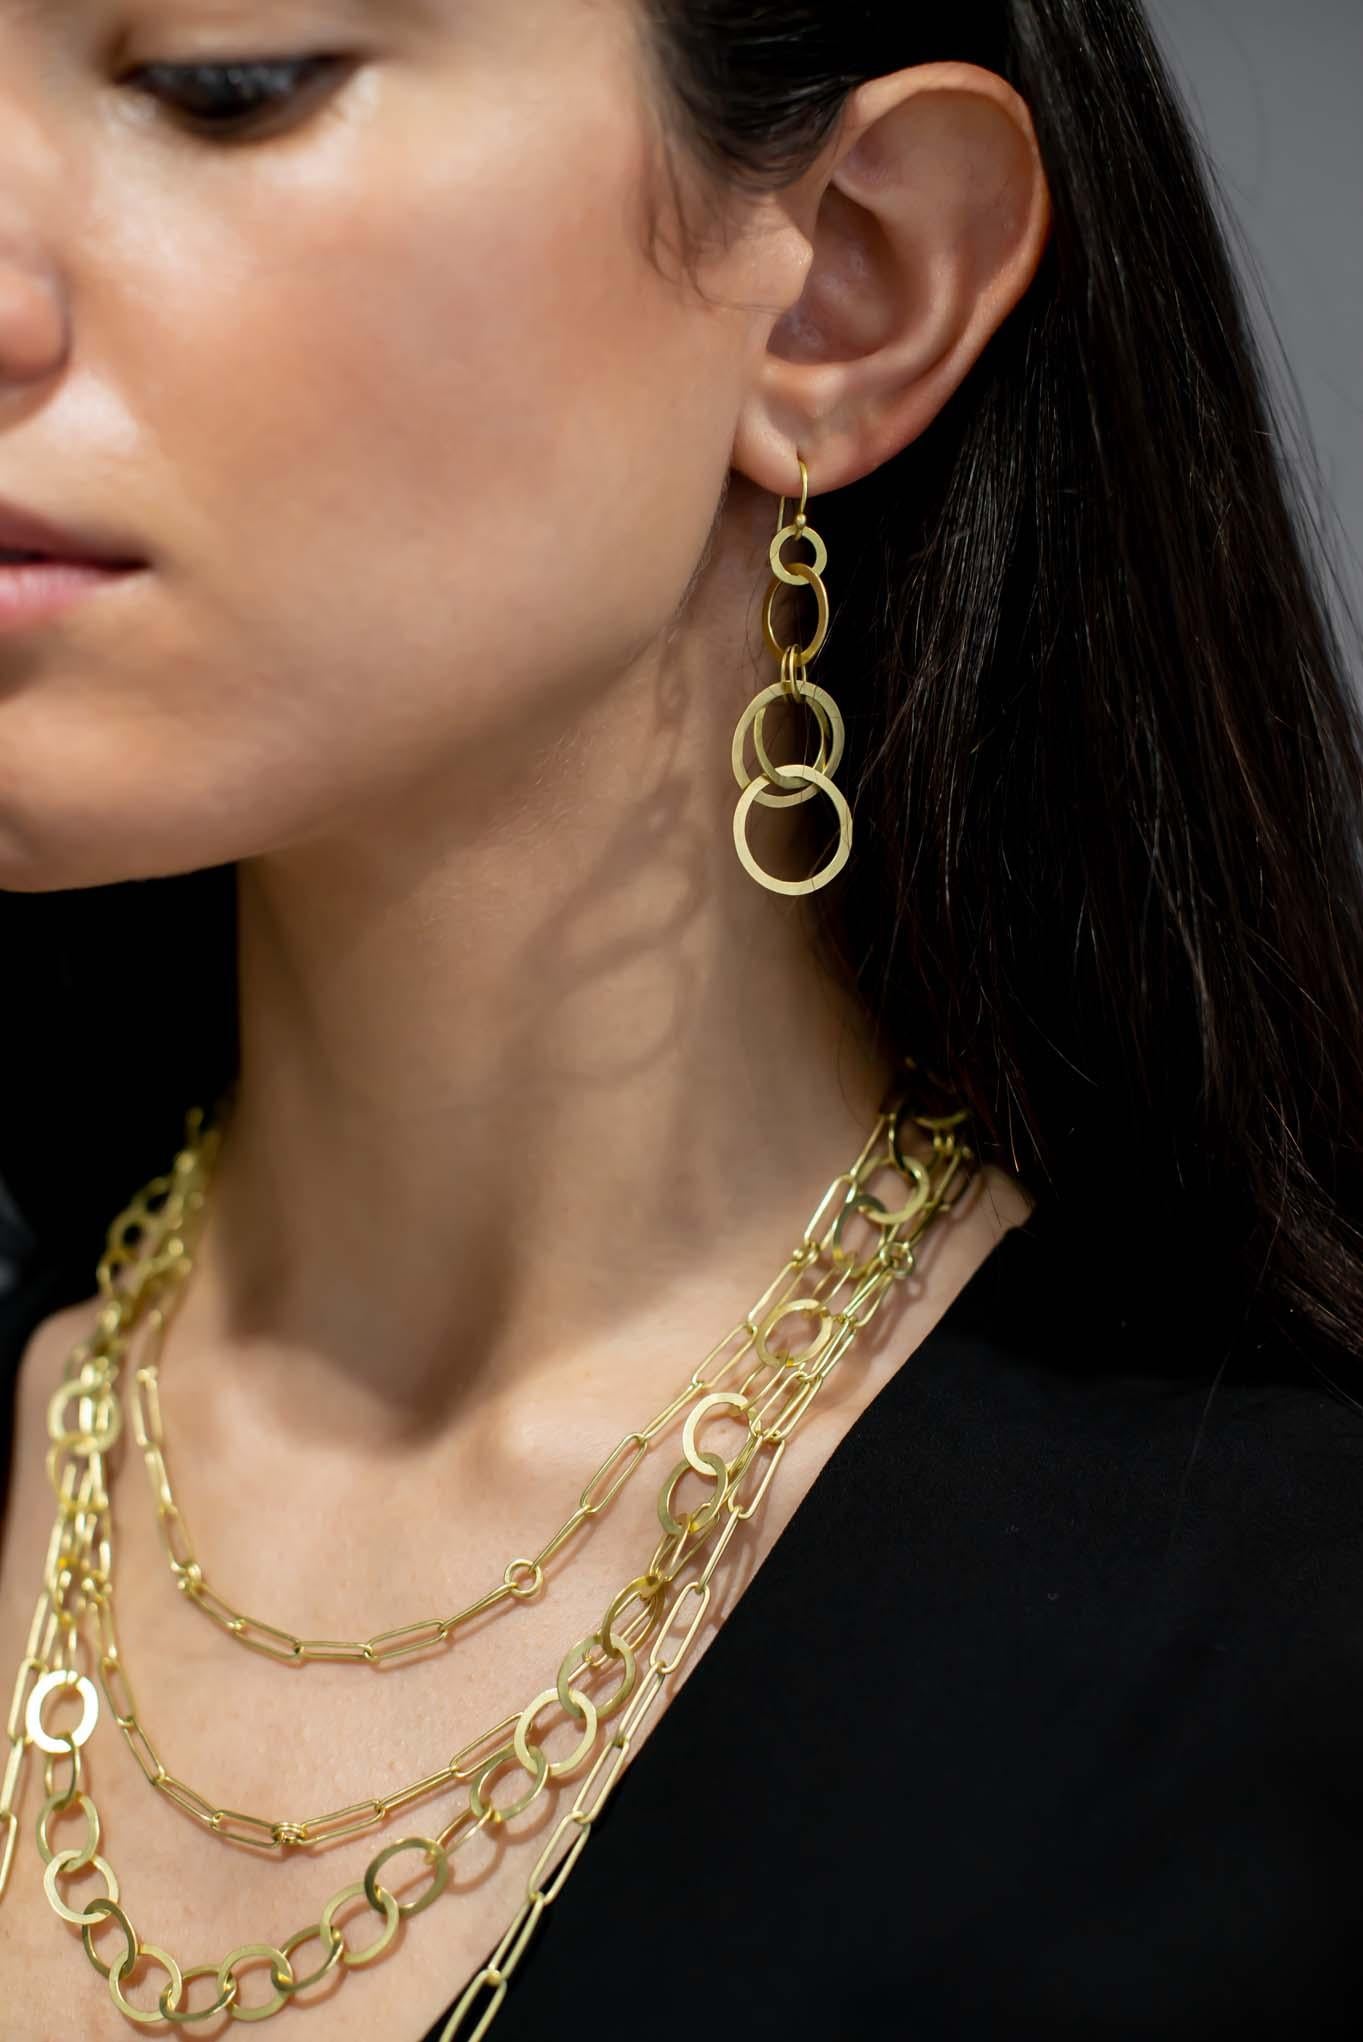 
Faye Kim's 18 Karat Gold Planished Multi Loop Earrings on hinged ear wires are an instant classic, and can be worn with virtually any outfit, for any occasion. The gold loops are hand planished and matte-finished, adding texture and dimension.